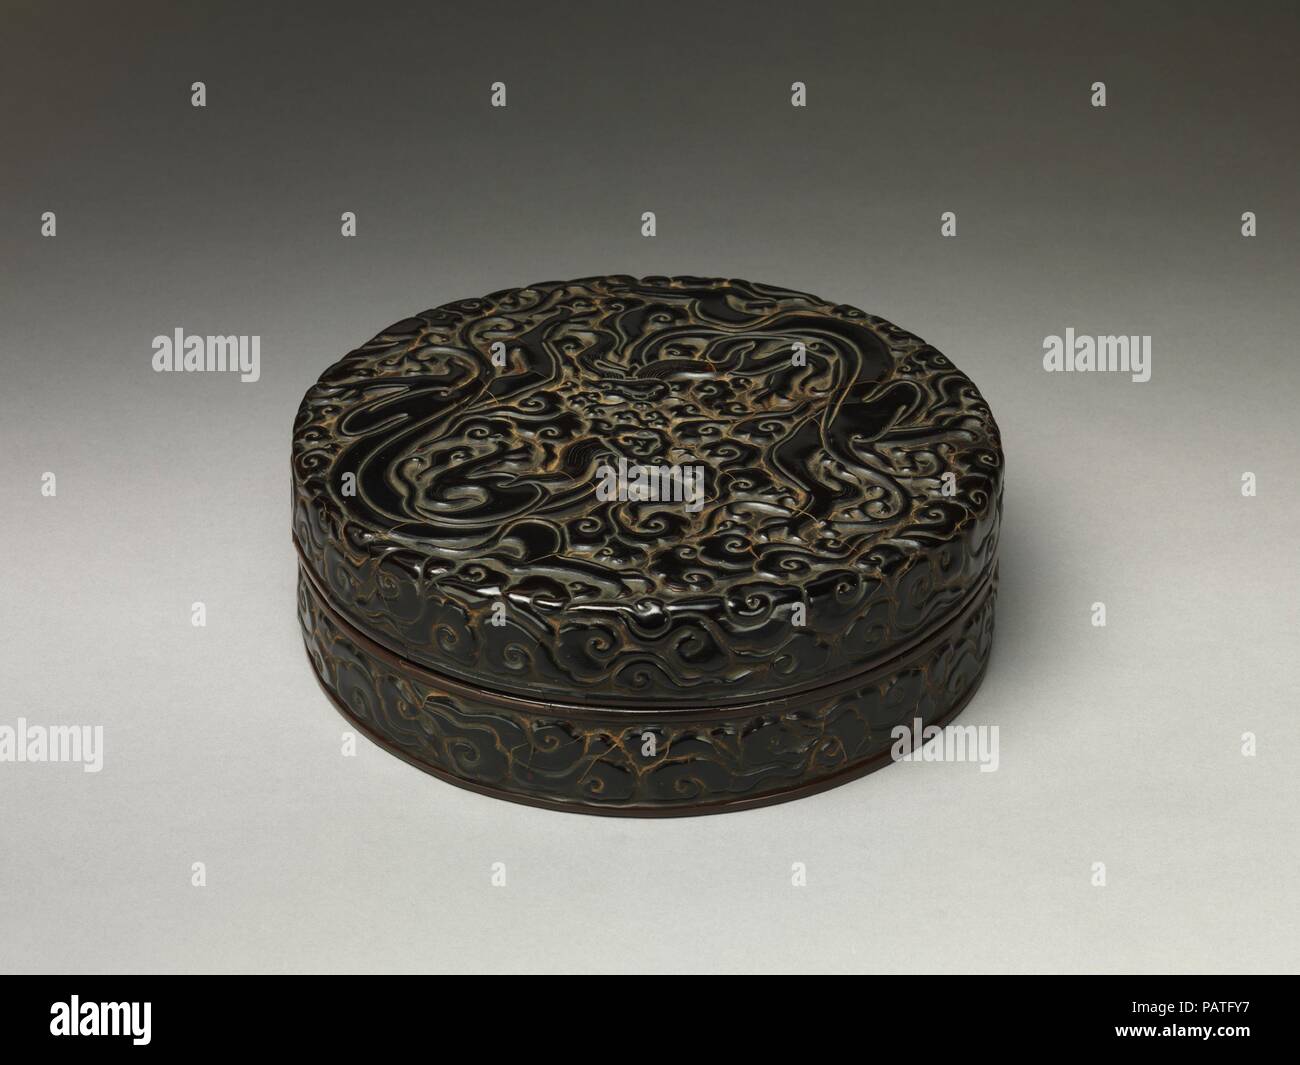 Box with chi dragons amid clouds. Culture: China. Dimensions: H. 3 in (7.6 cm); Diam. 9 5/8 in. (24.4 cm). Date: 13th century.  Known as chi, the feline dragons that curve along the surface of this box were inspired by comparable creatures found on Bronze Age vessels, which were rediscovered during the Song dynasty and often reinterpreted in the arts of that period. Although they lack the large horns, prominent snouts, and scaled body of the typical Chinese depiction of the dragon, chi dragons are also regarded as auspicious and protective. Museum: Metropolitan Museum of Art, New York, USA. Stock Photo